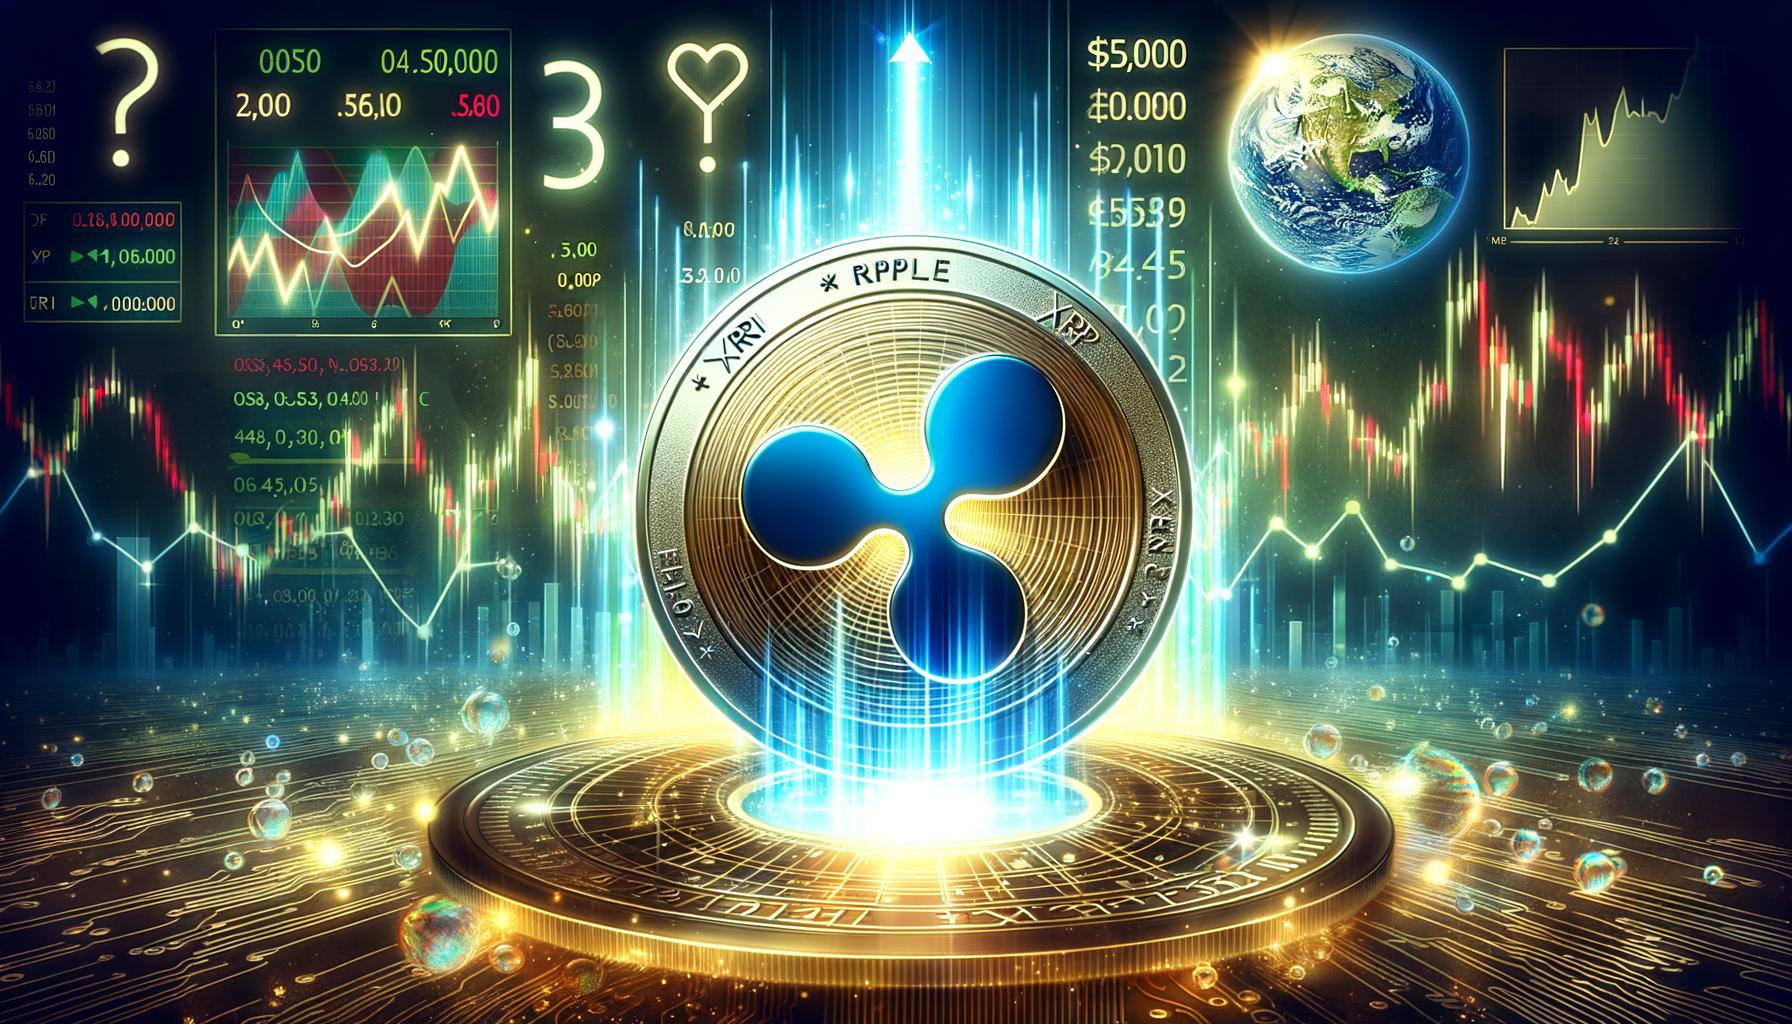 XRP Price Positioned for a Surge: Is Another Rally on the Horizon?